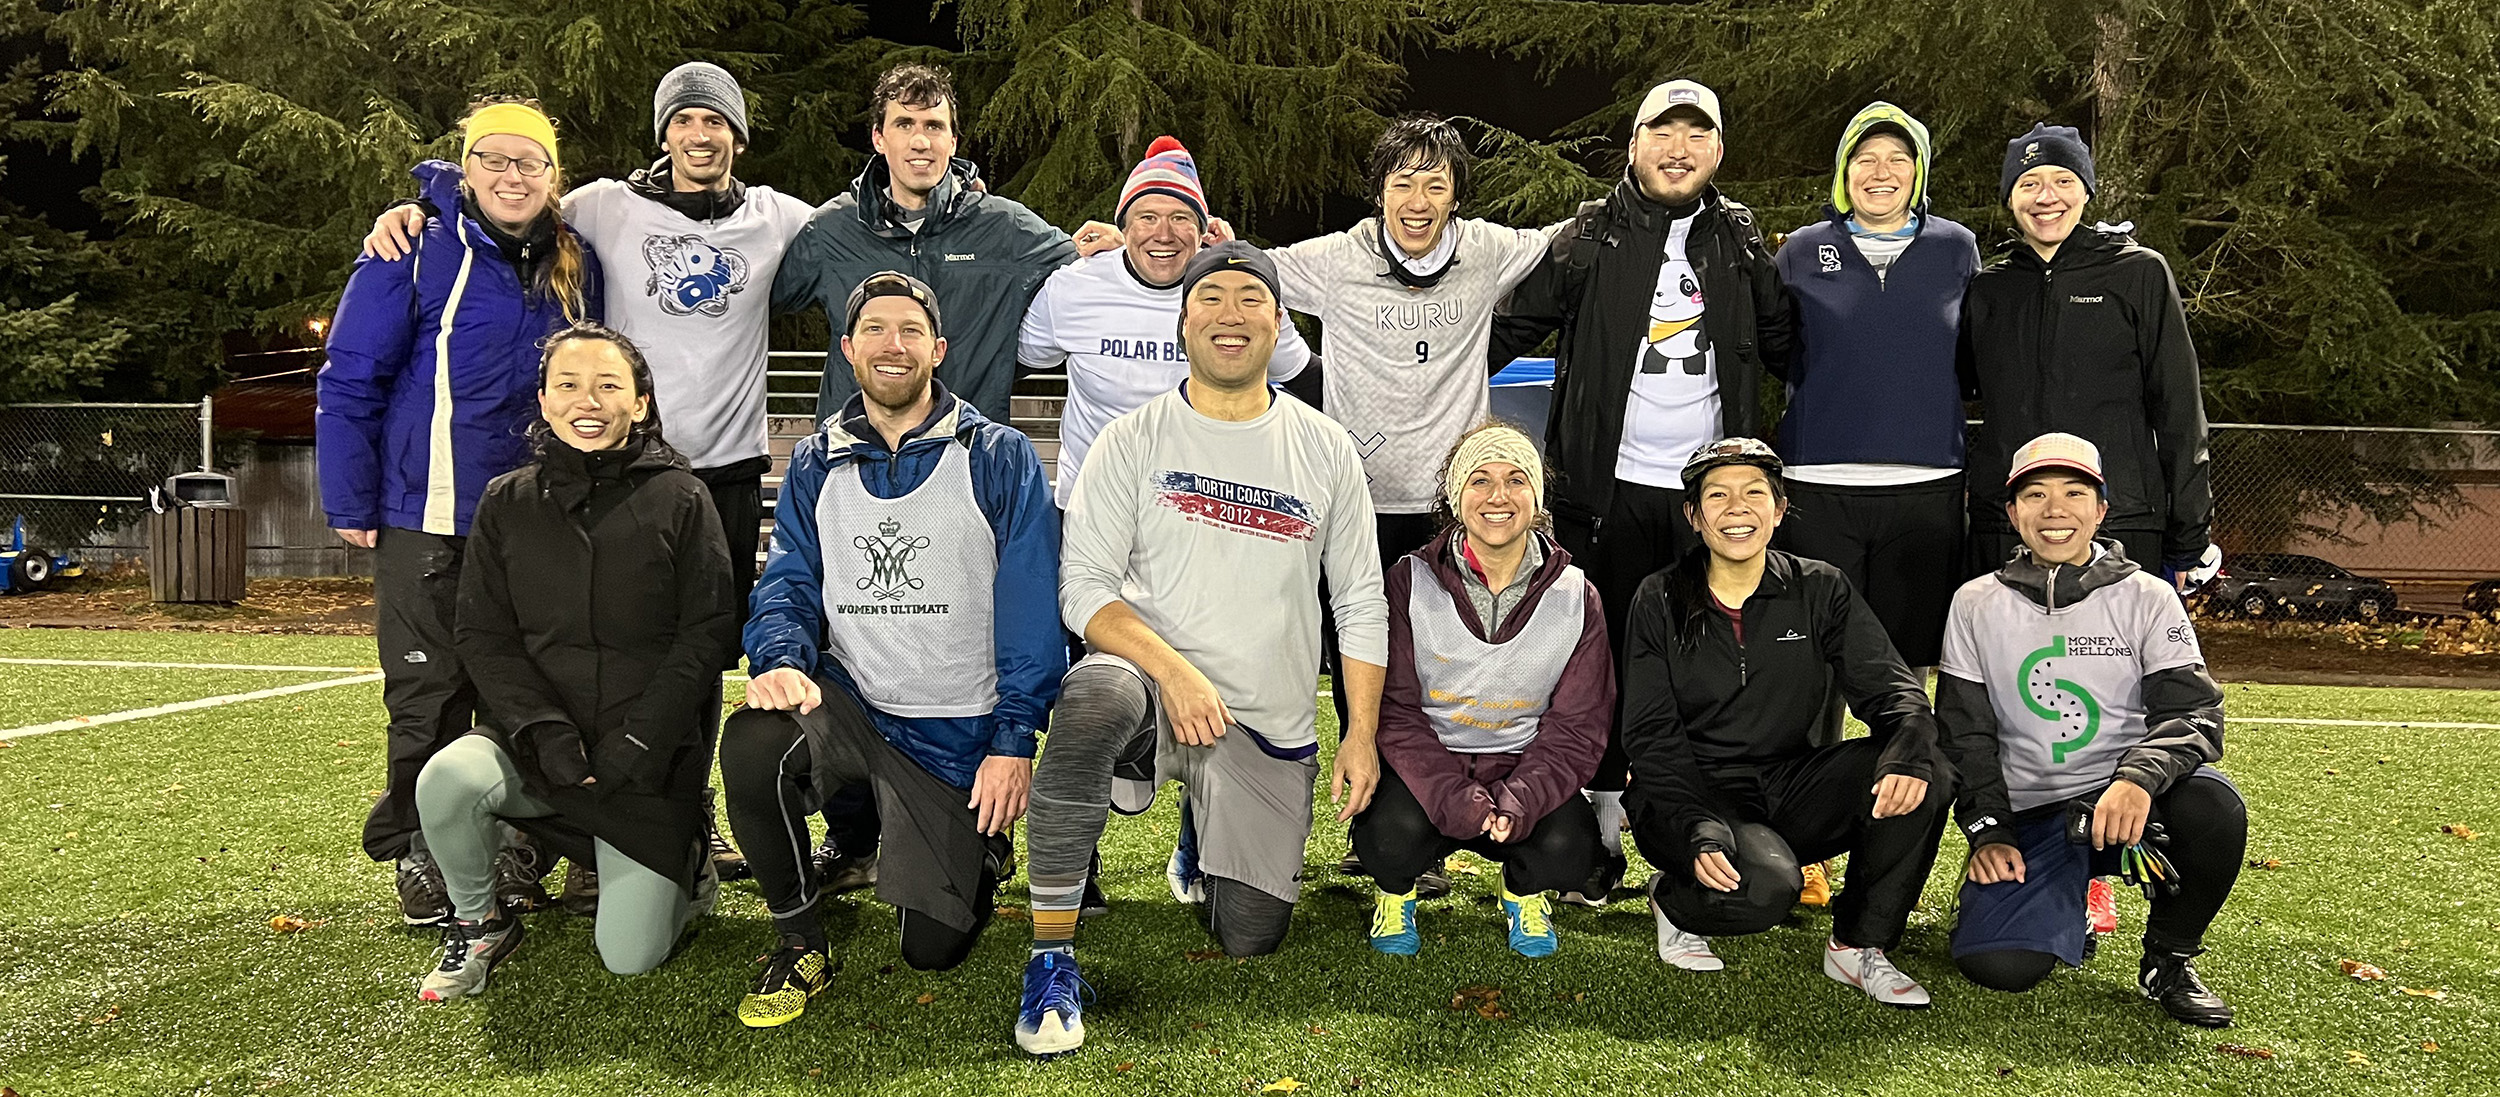 A team photo of Matsushita's ultimate frisbee team showing 14 people in two rows on a field. Matsushita is kneeling in the front row at right. 